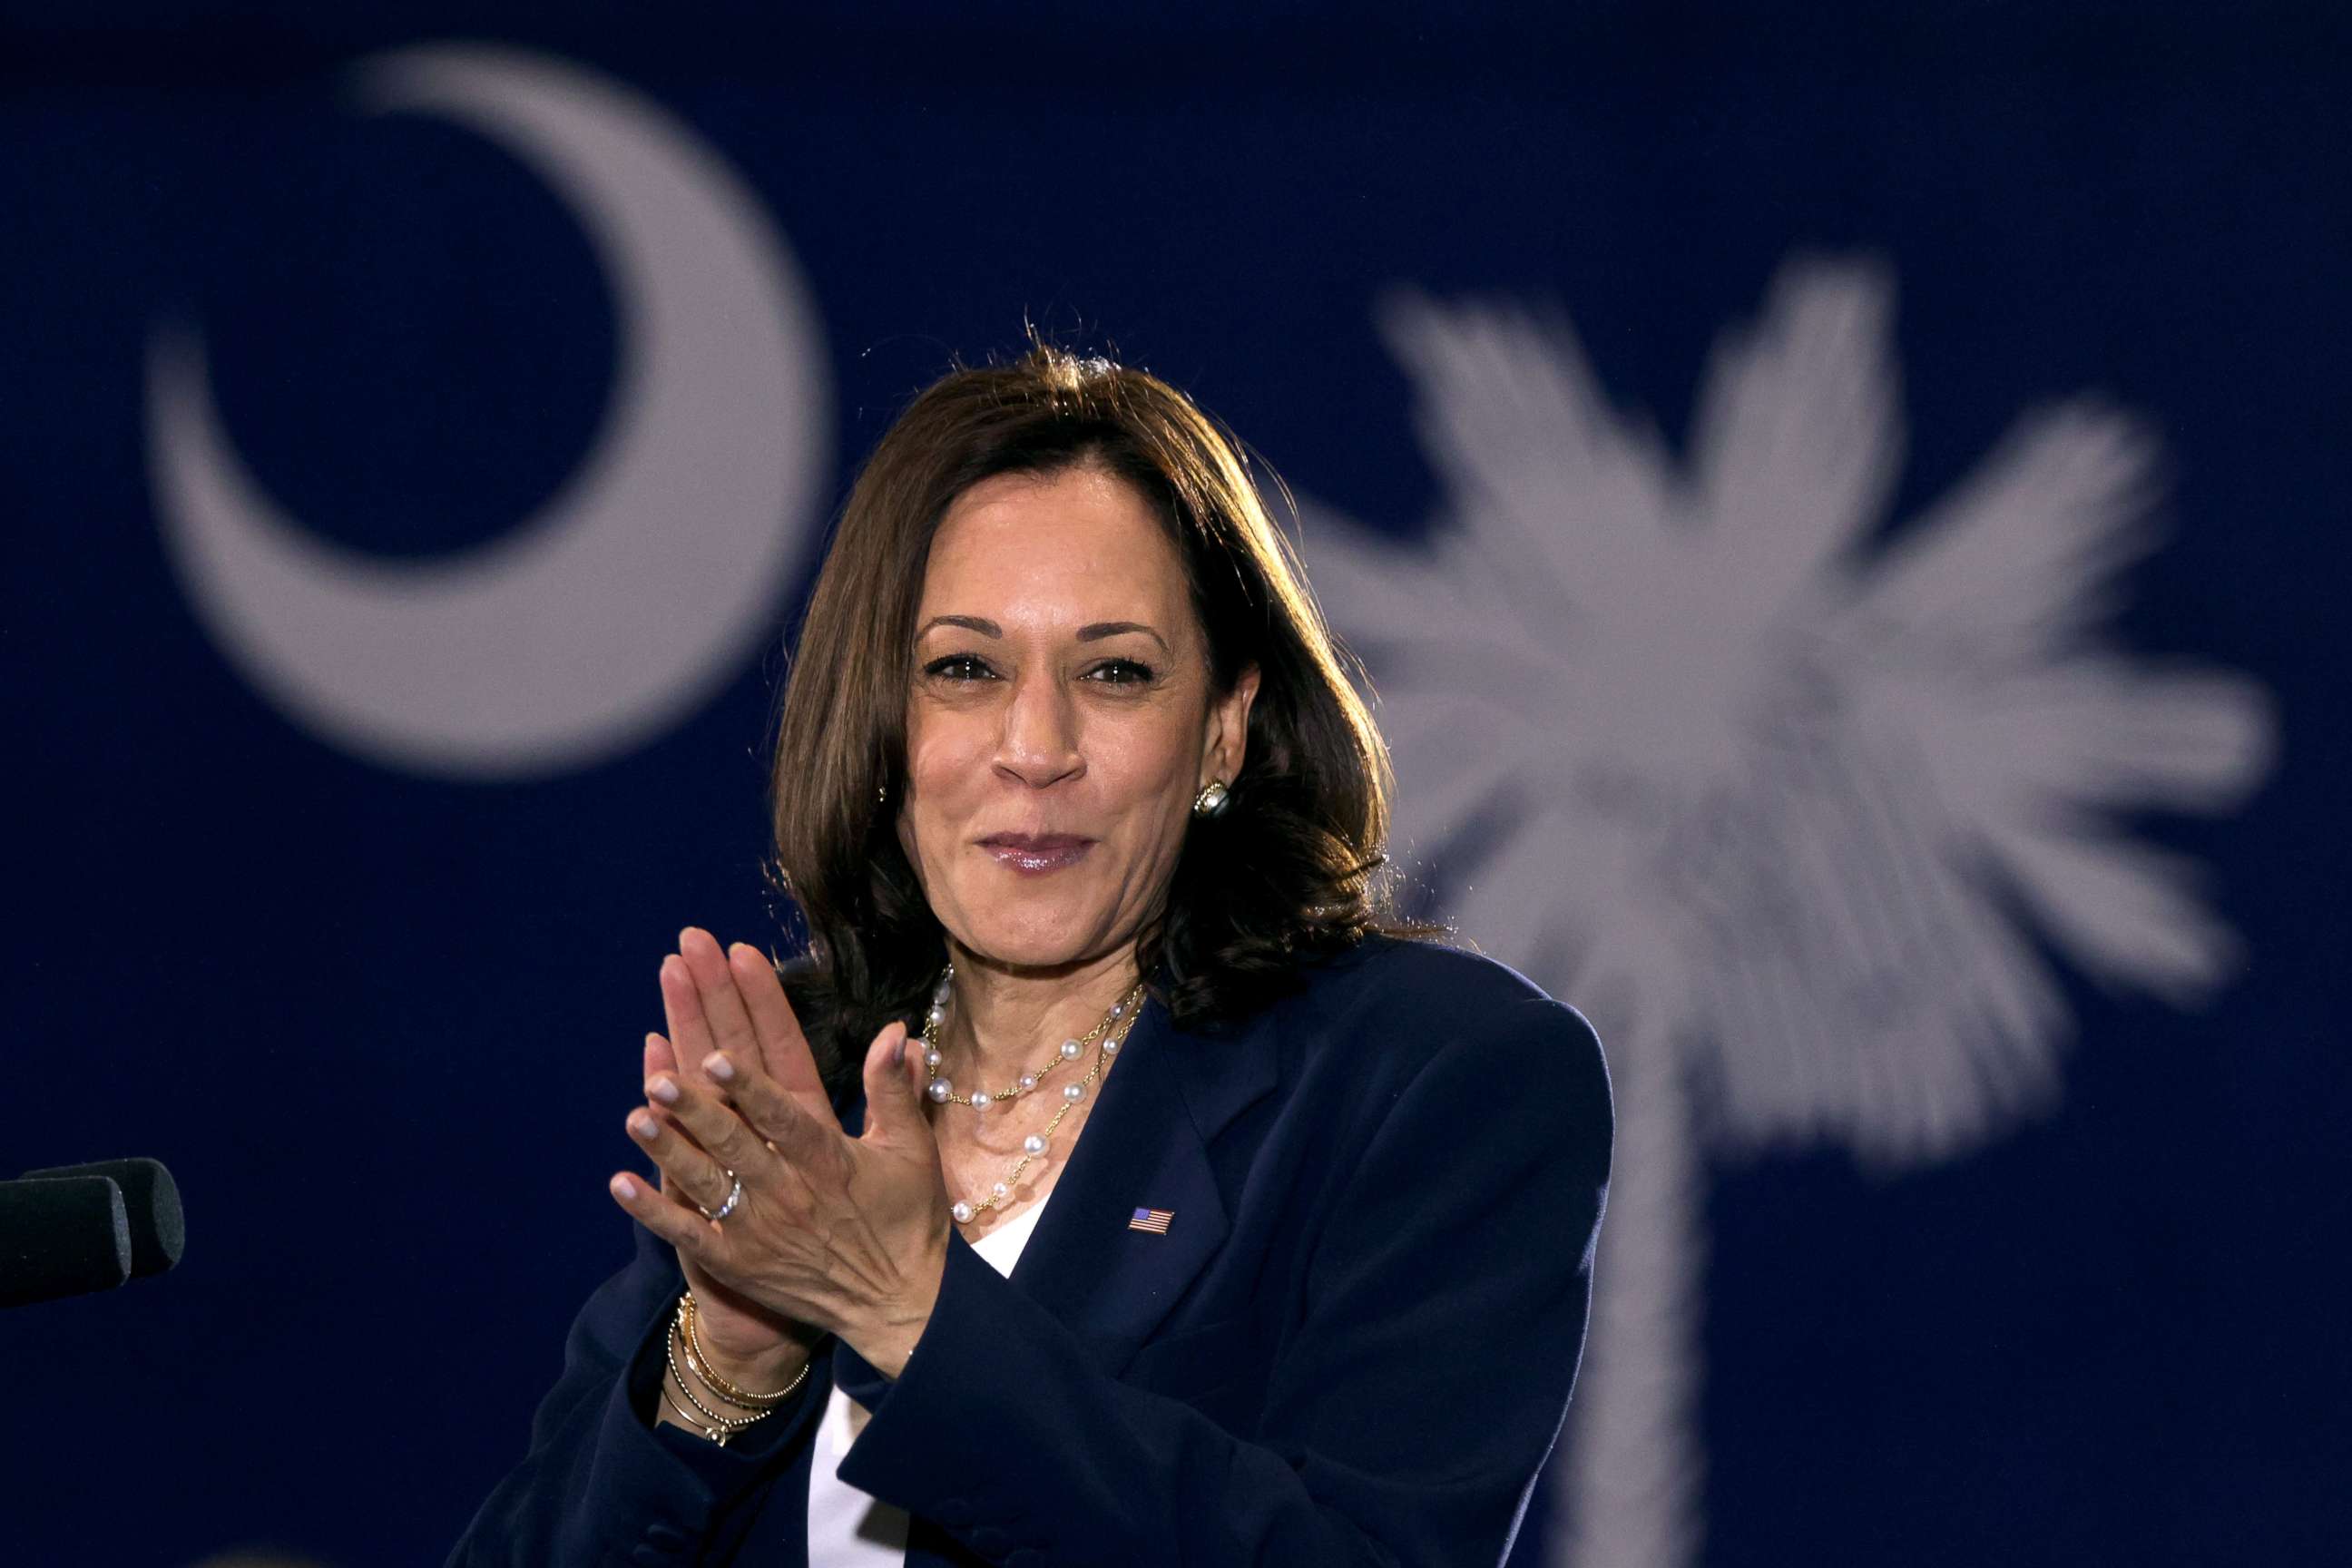 PHOTO: Vice President Kamala Harris claps as she delivers remarks at a COVID vaccination mobilization event at the Phillis Wheatley Community Center, June 14, 2021, in Greenville, South Carolina.